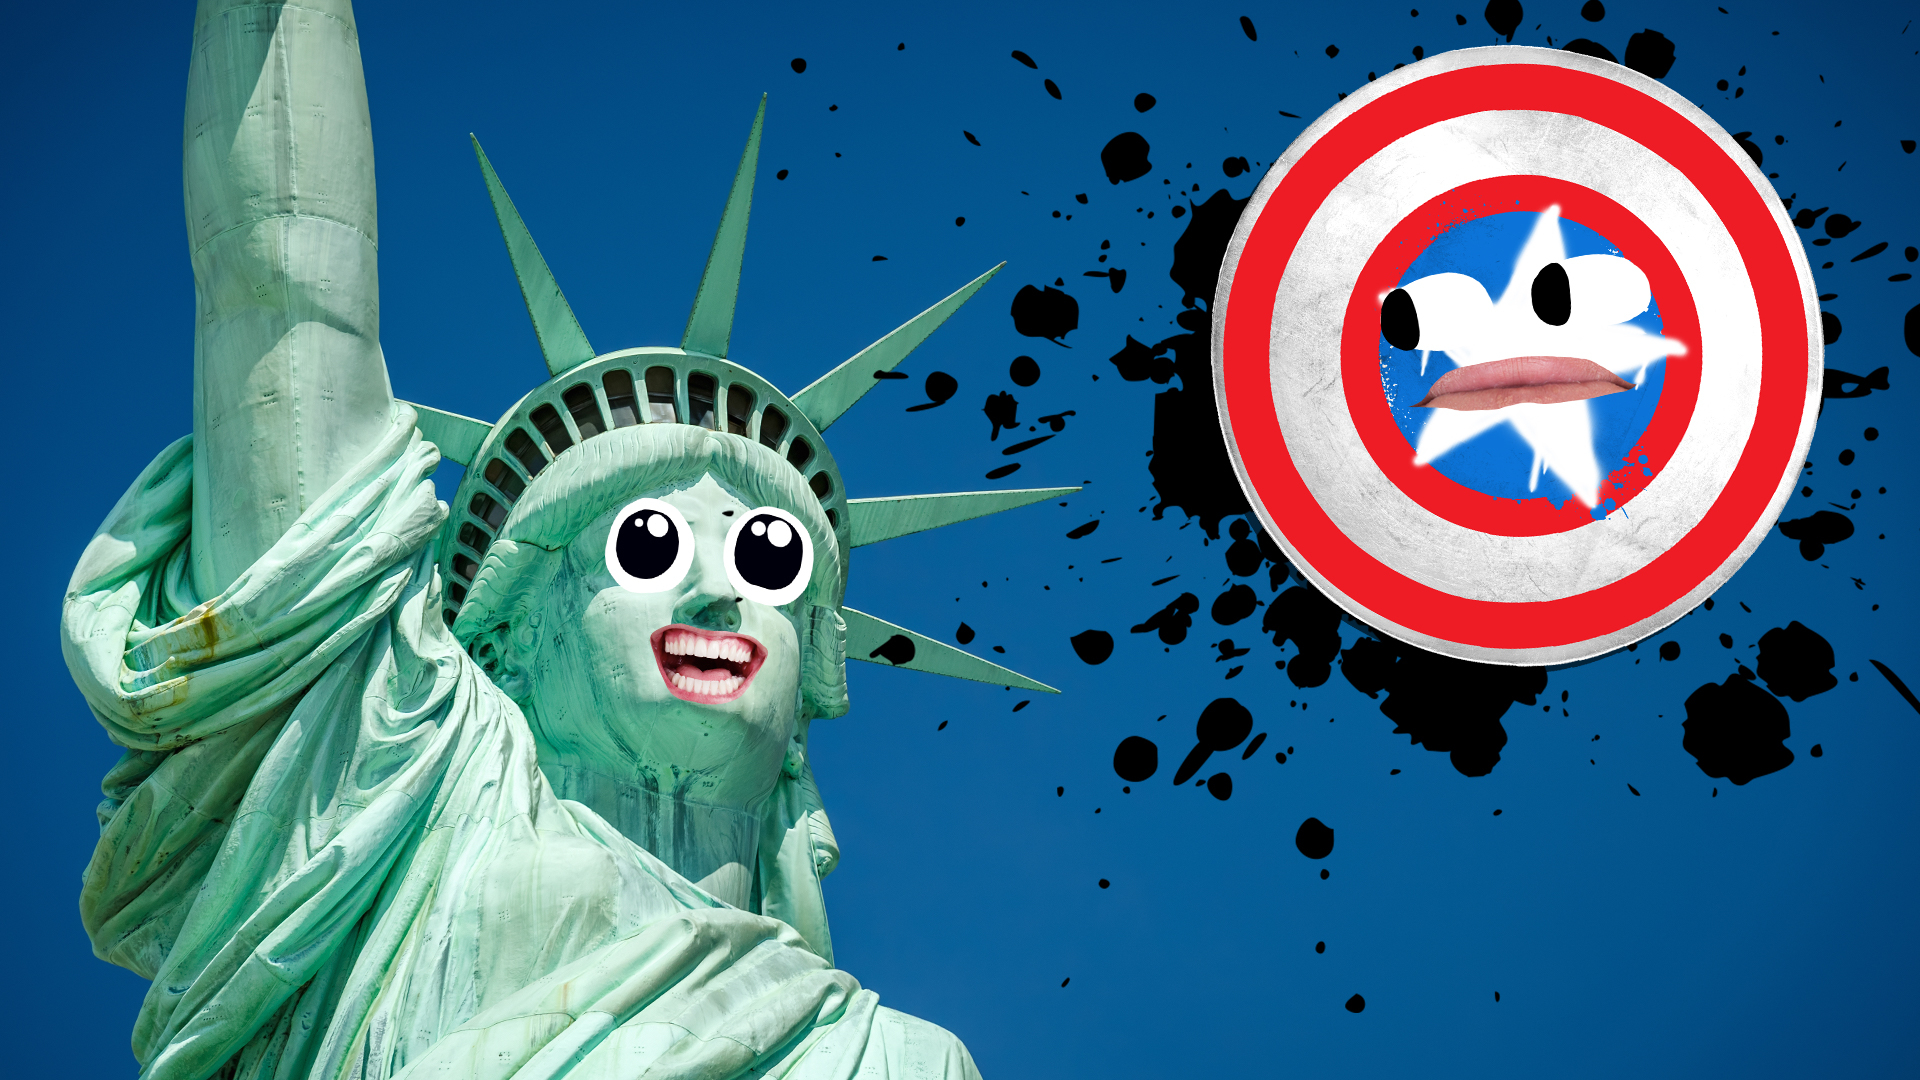 The statue of Liberty laughing at Captain America